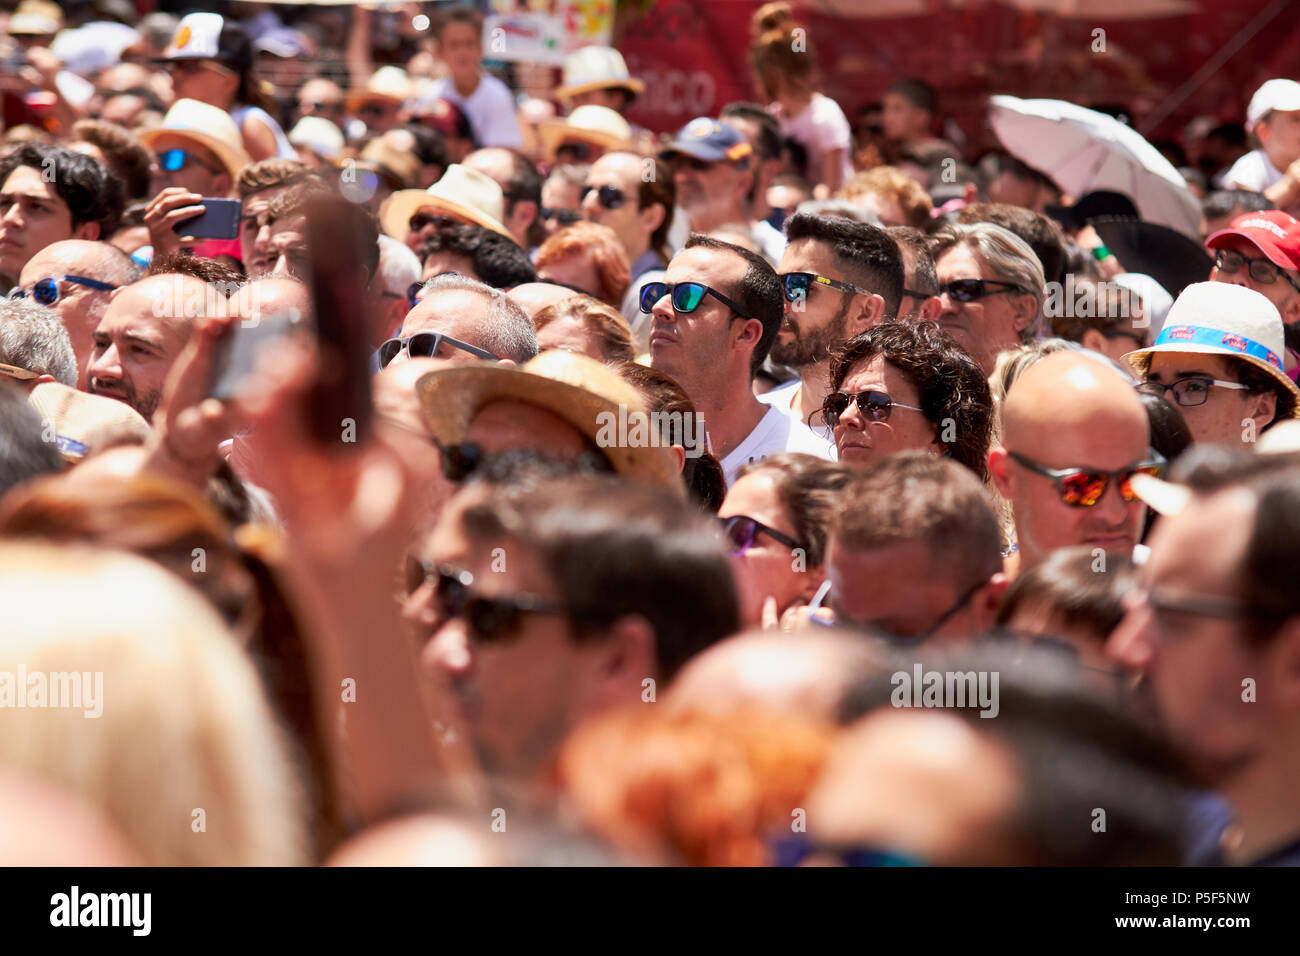 Man taking photos of the procession using mobile phone. Stock Photo